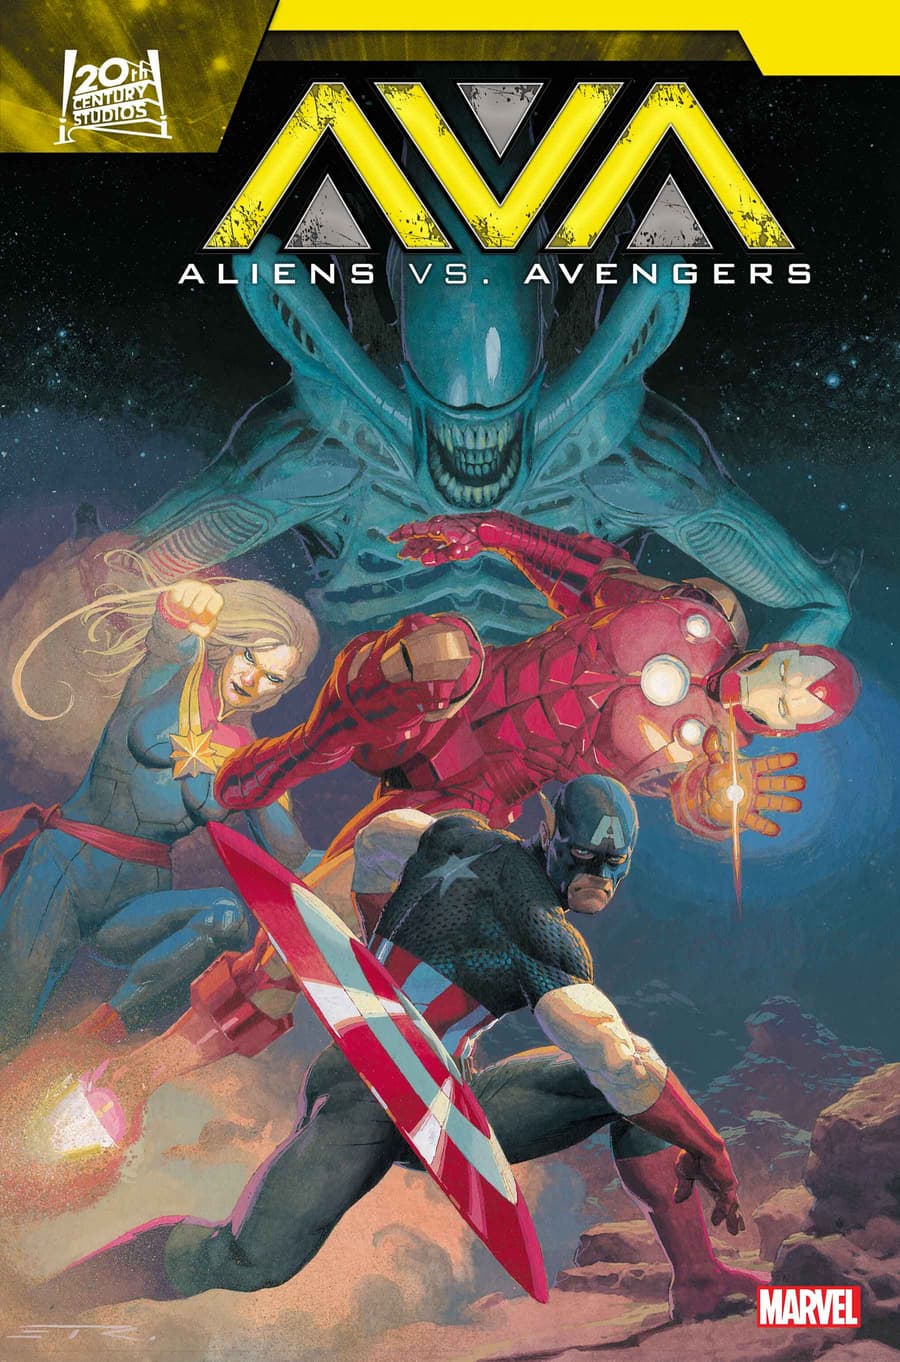 Marvel Comics has announced an Aliens Vs Avengers comic series is coming from writer Jonathan Hickman